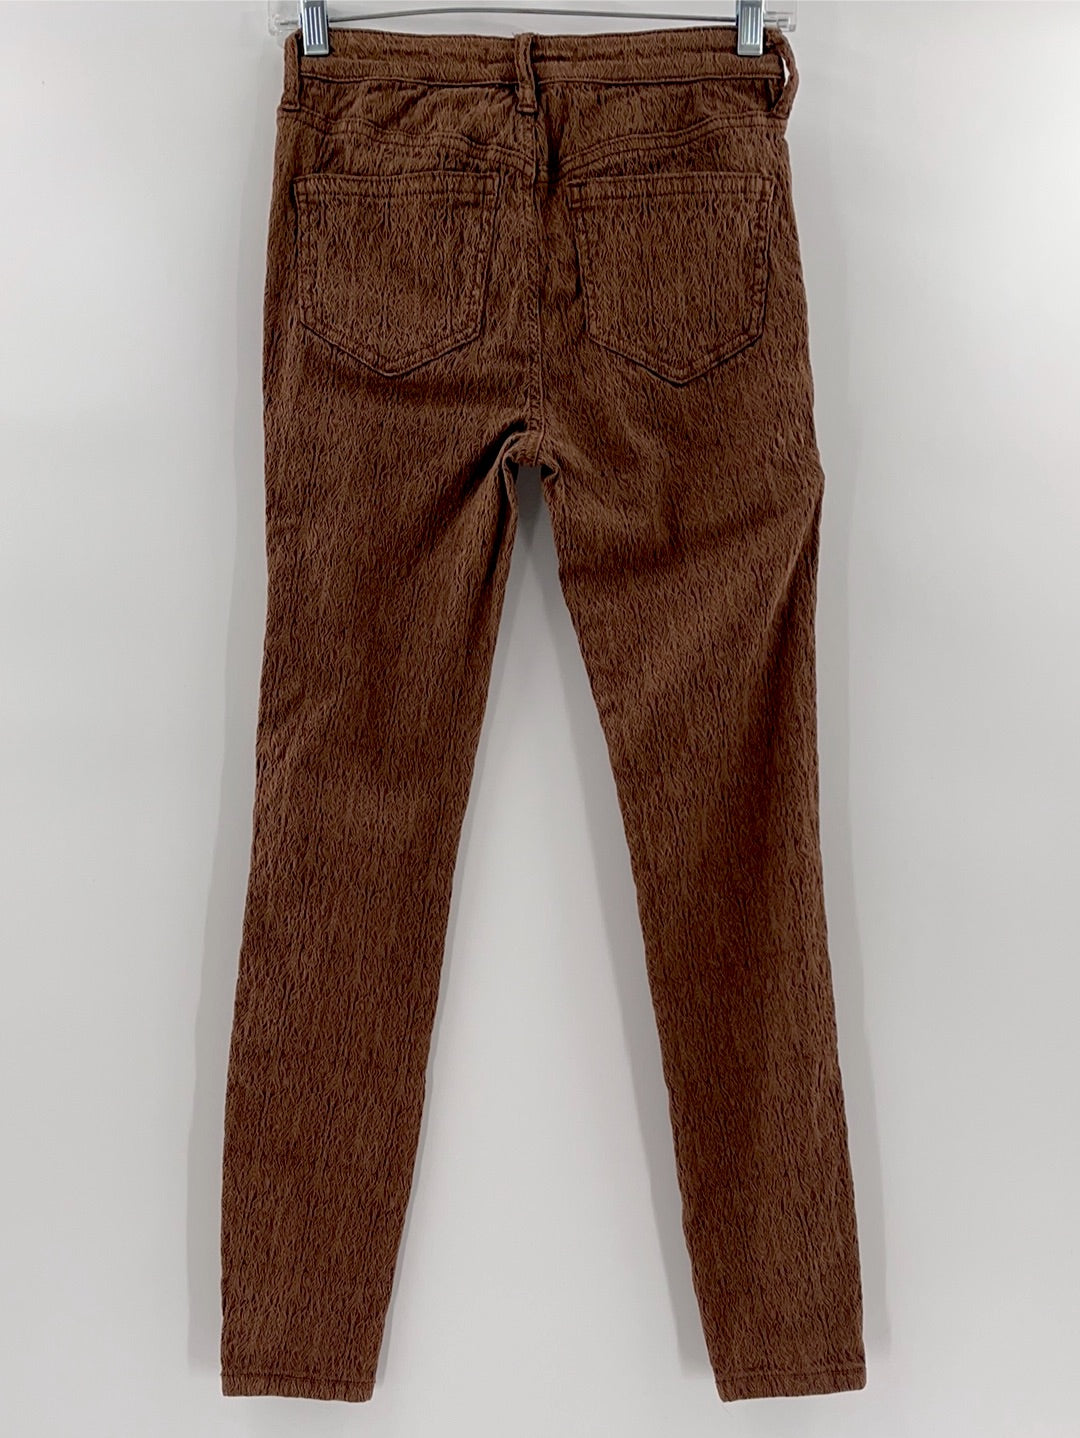 Free People Textured Brown Jeans (XS)